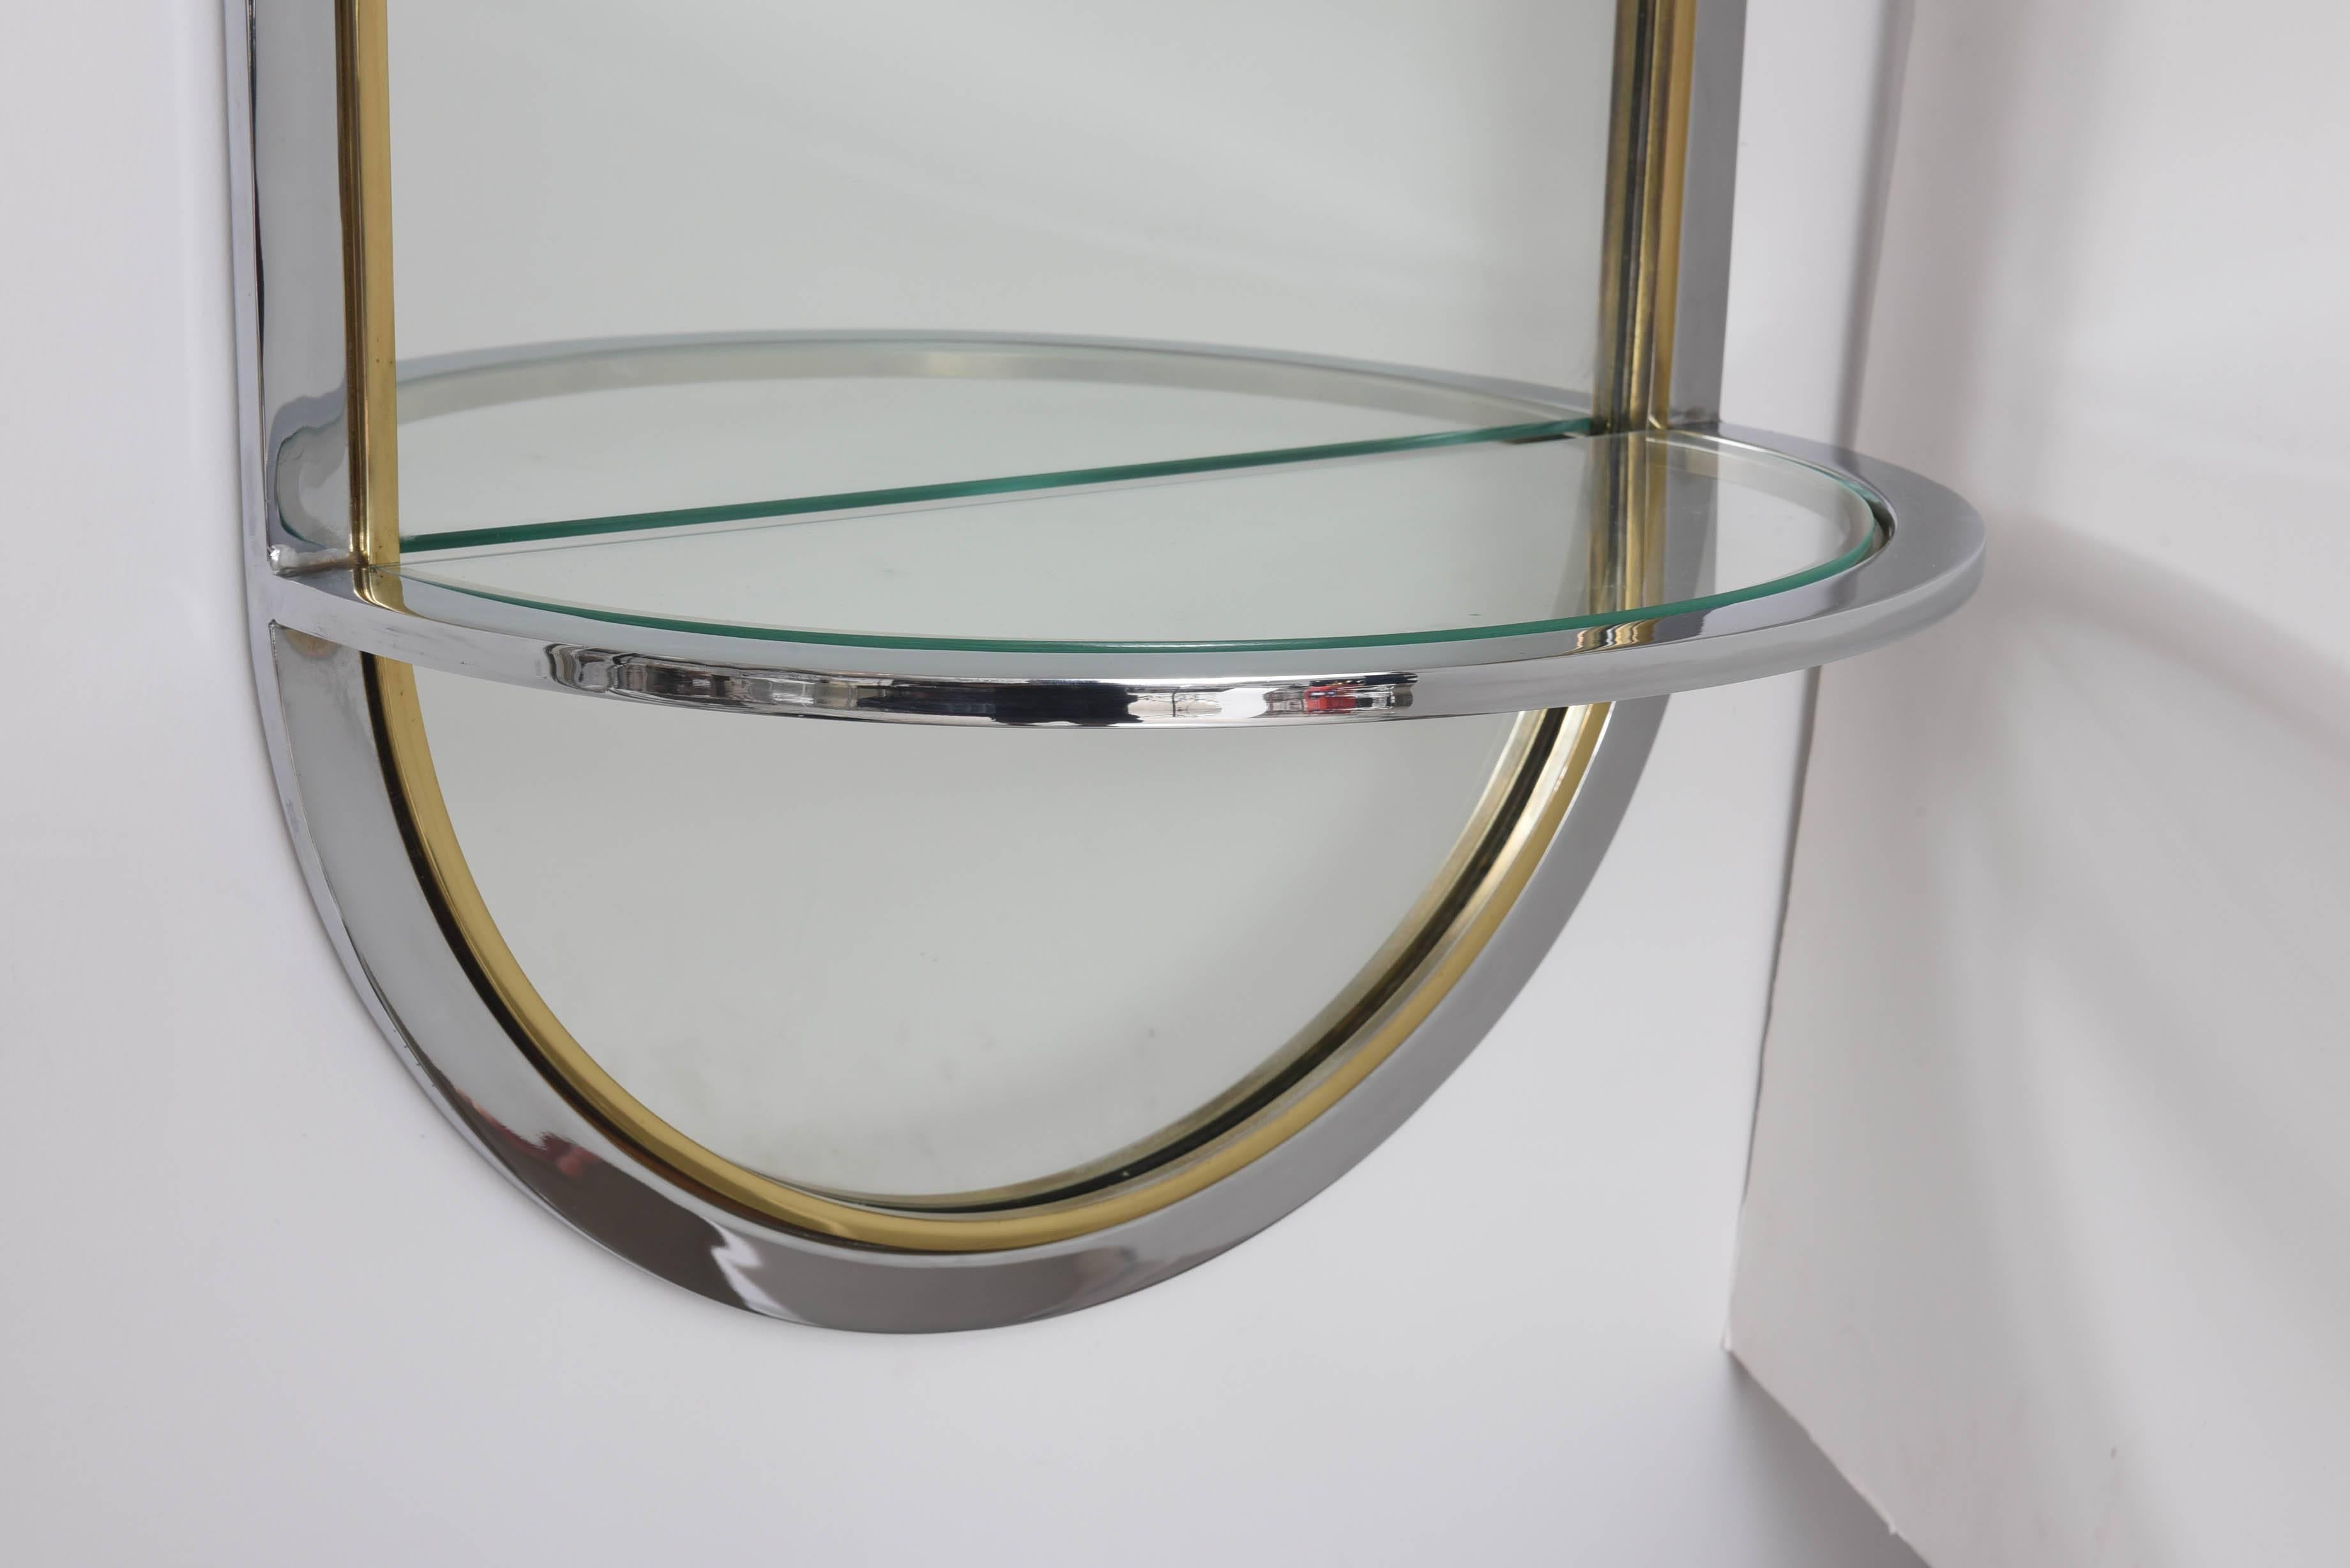 This piece was designed for DIA in the 1970s. The race-track design is comprised of a single band of polished chrome and a band of polished brass. The suspended shelf has an inset piece of clear glass.

Note: The shelf is 9.75